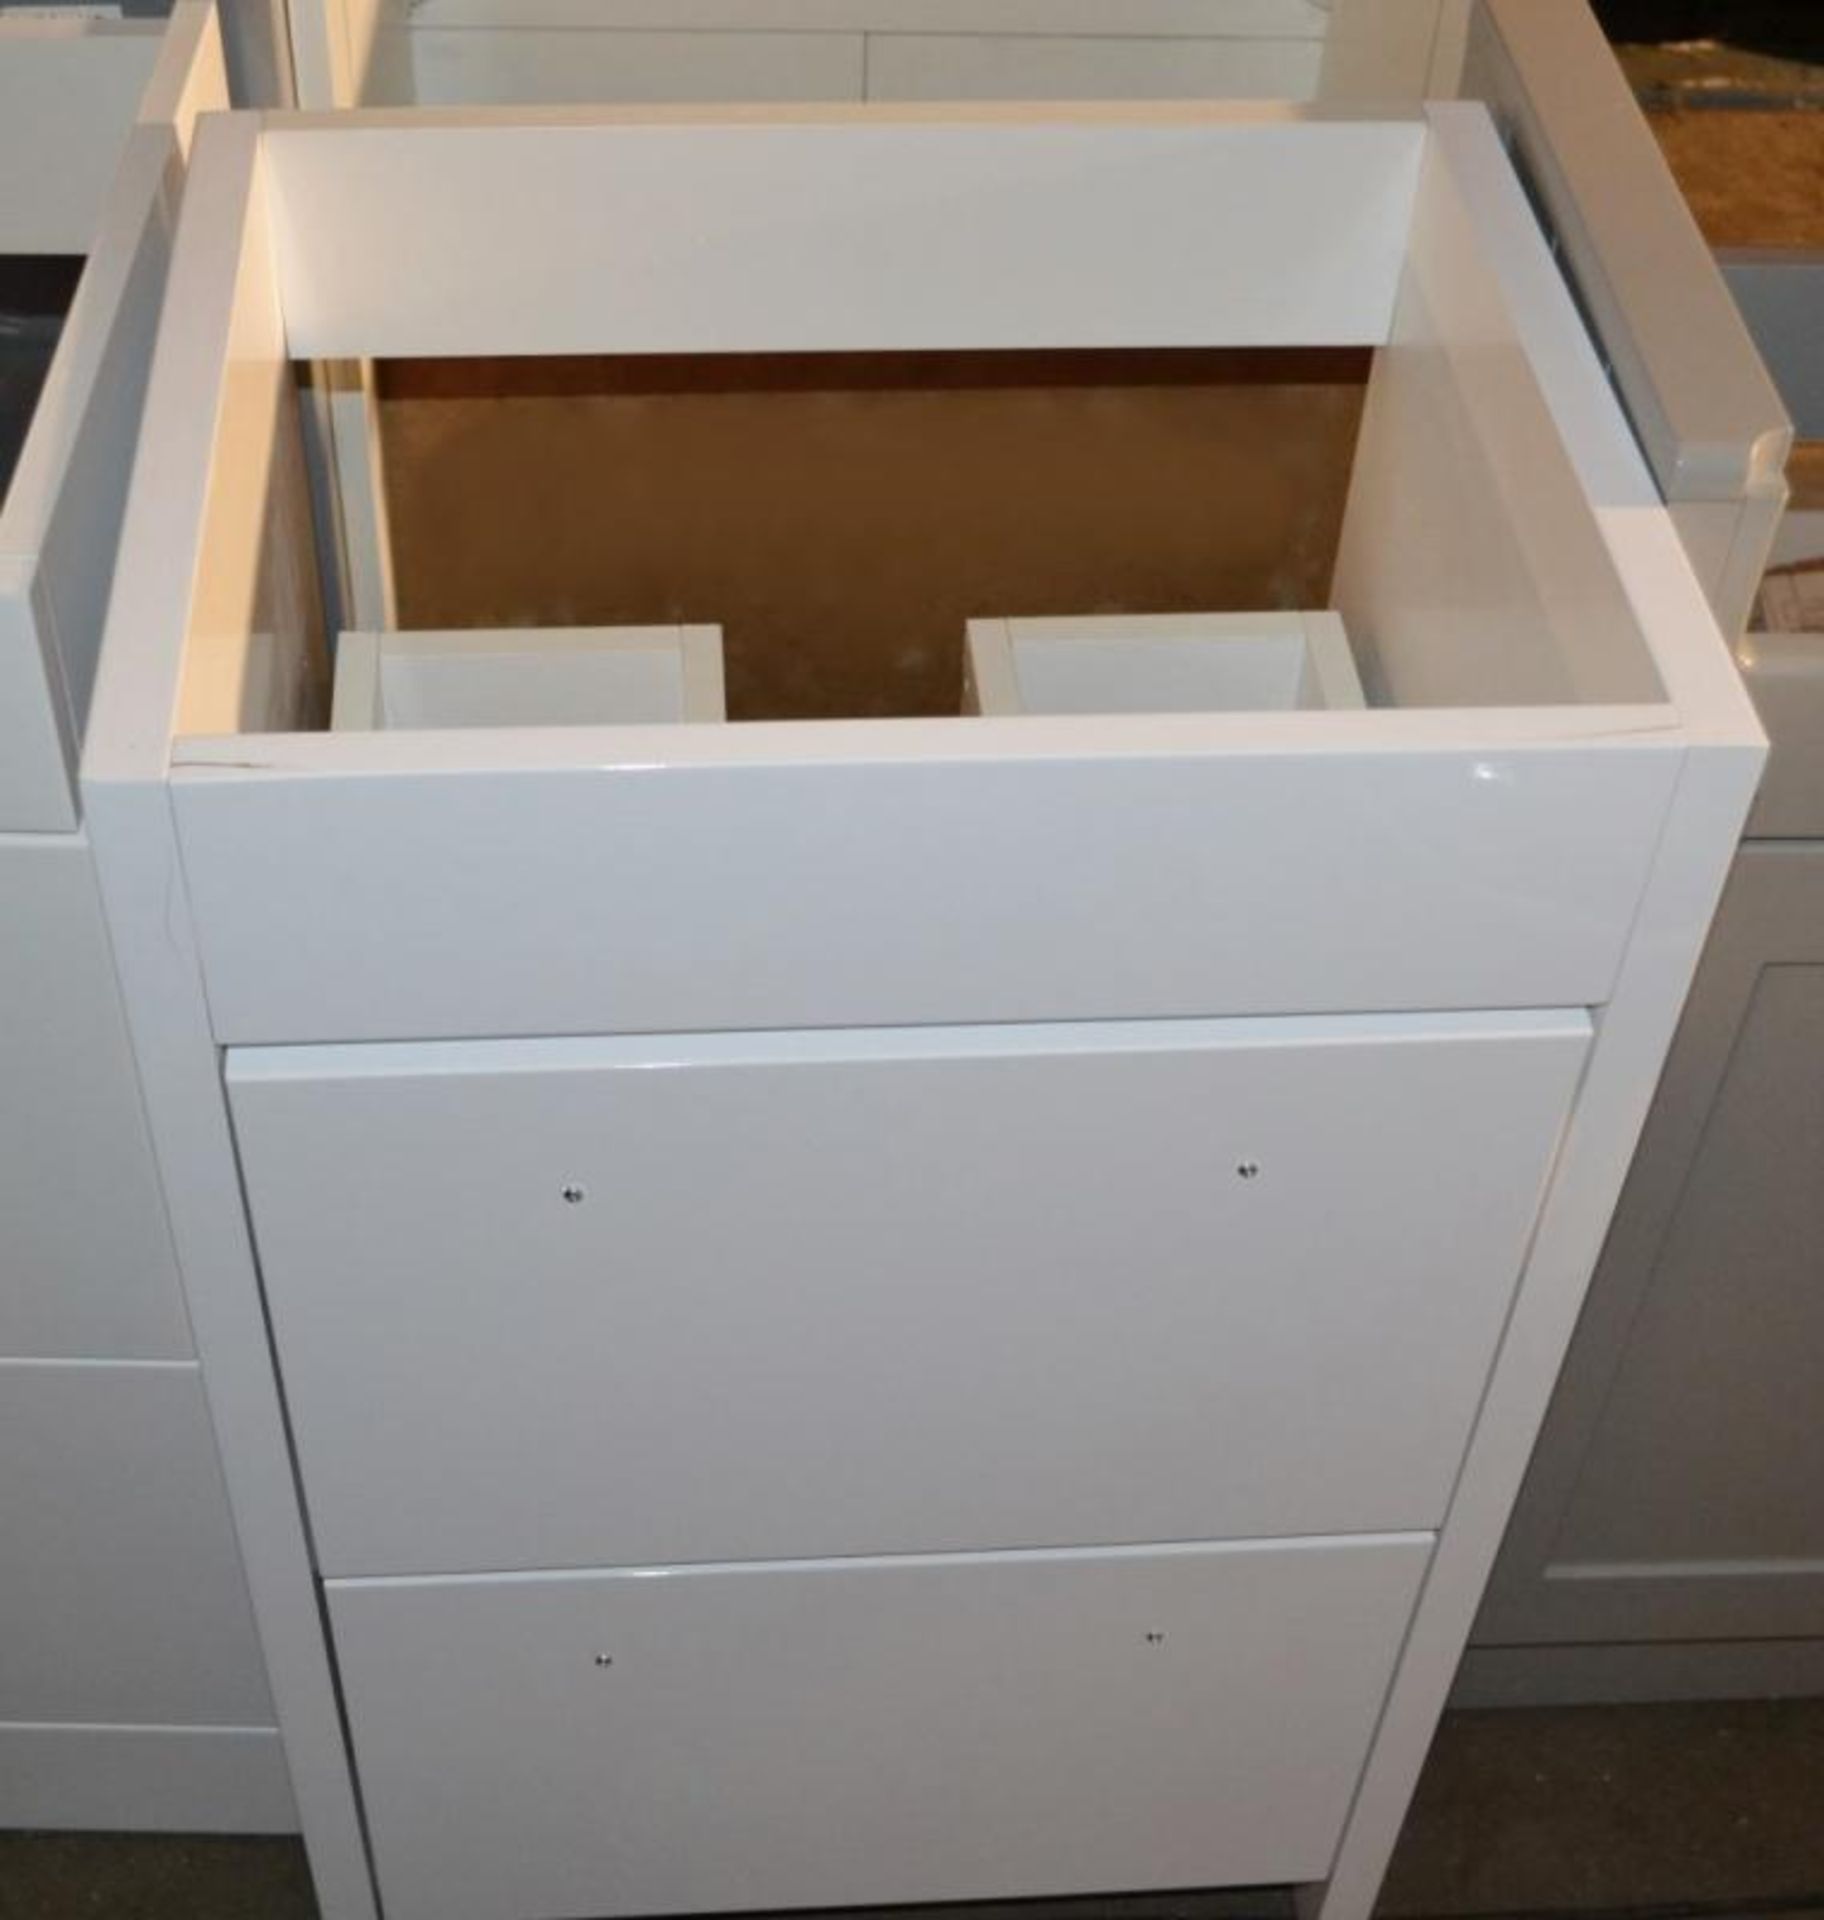 1 x Freestanding 2-Drawer Vanity Basin Unit In A Gloss White Finish - New / Unused Stock - Dimension - Image 5 of 6